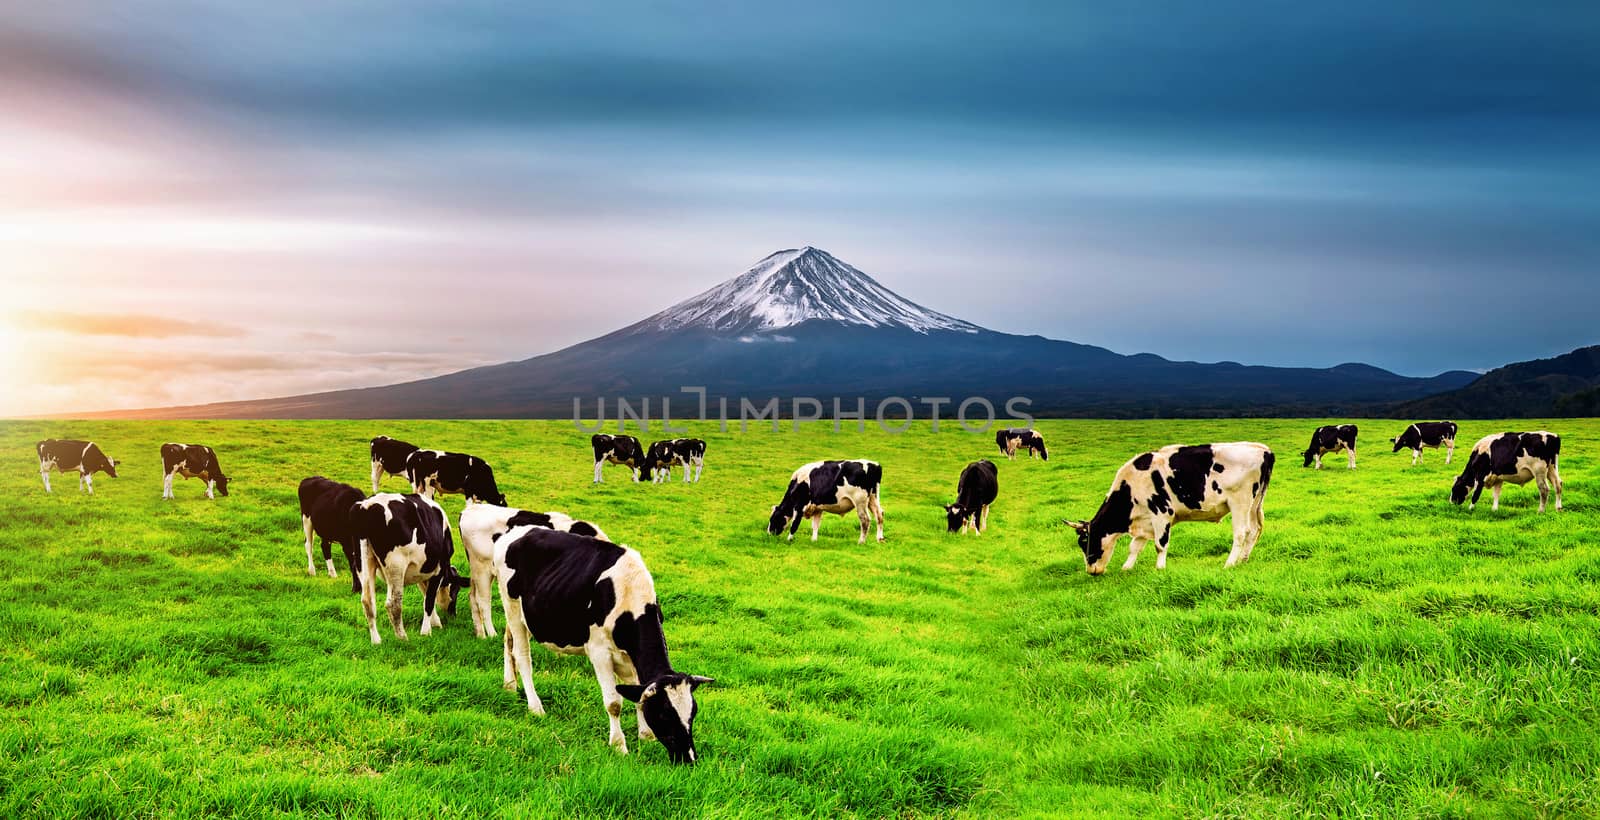 Cows eating lush grass on the green field in front of Fuji mountain, Japan. by gutarphotoghaphy